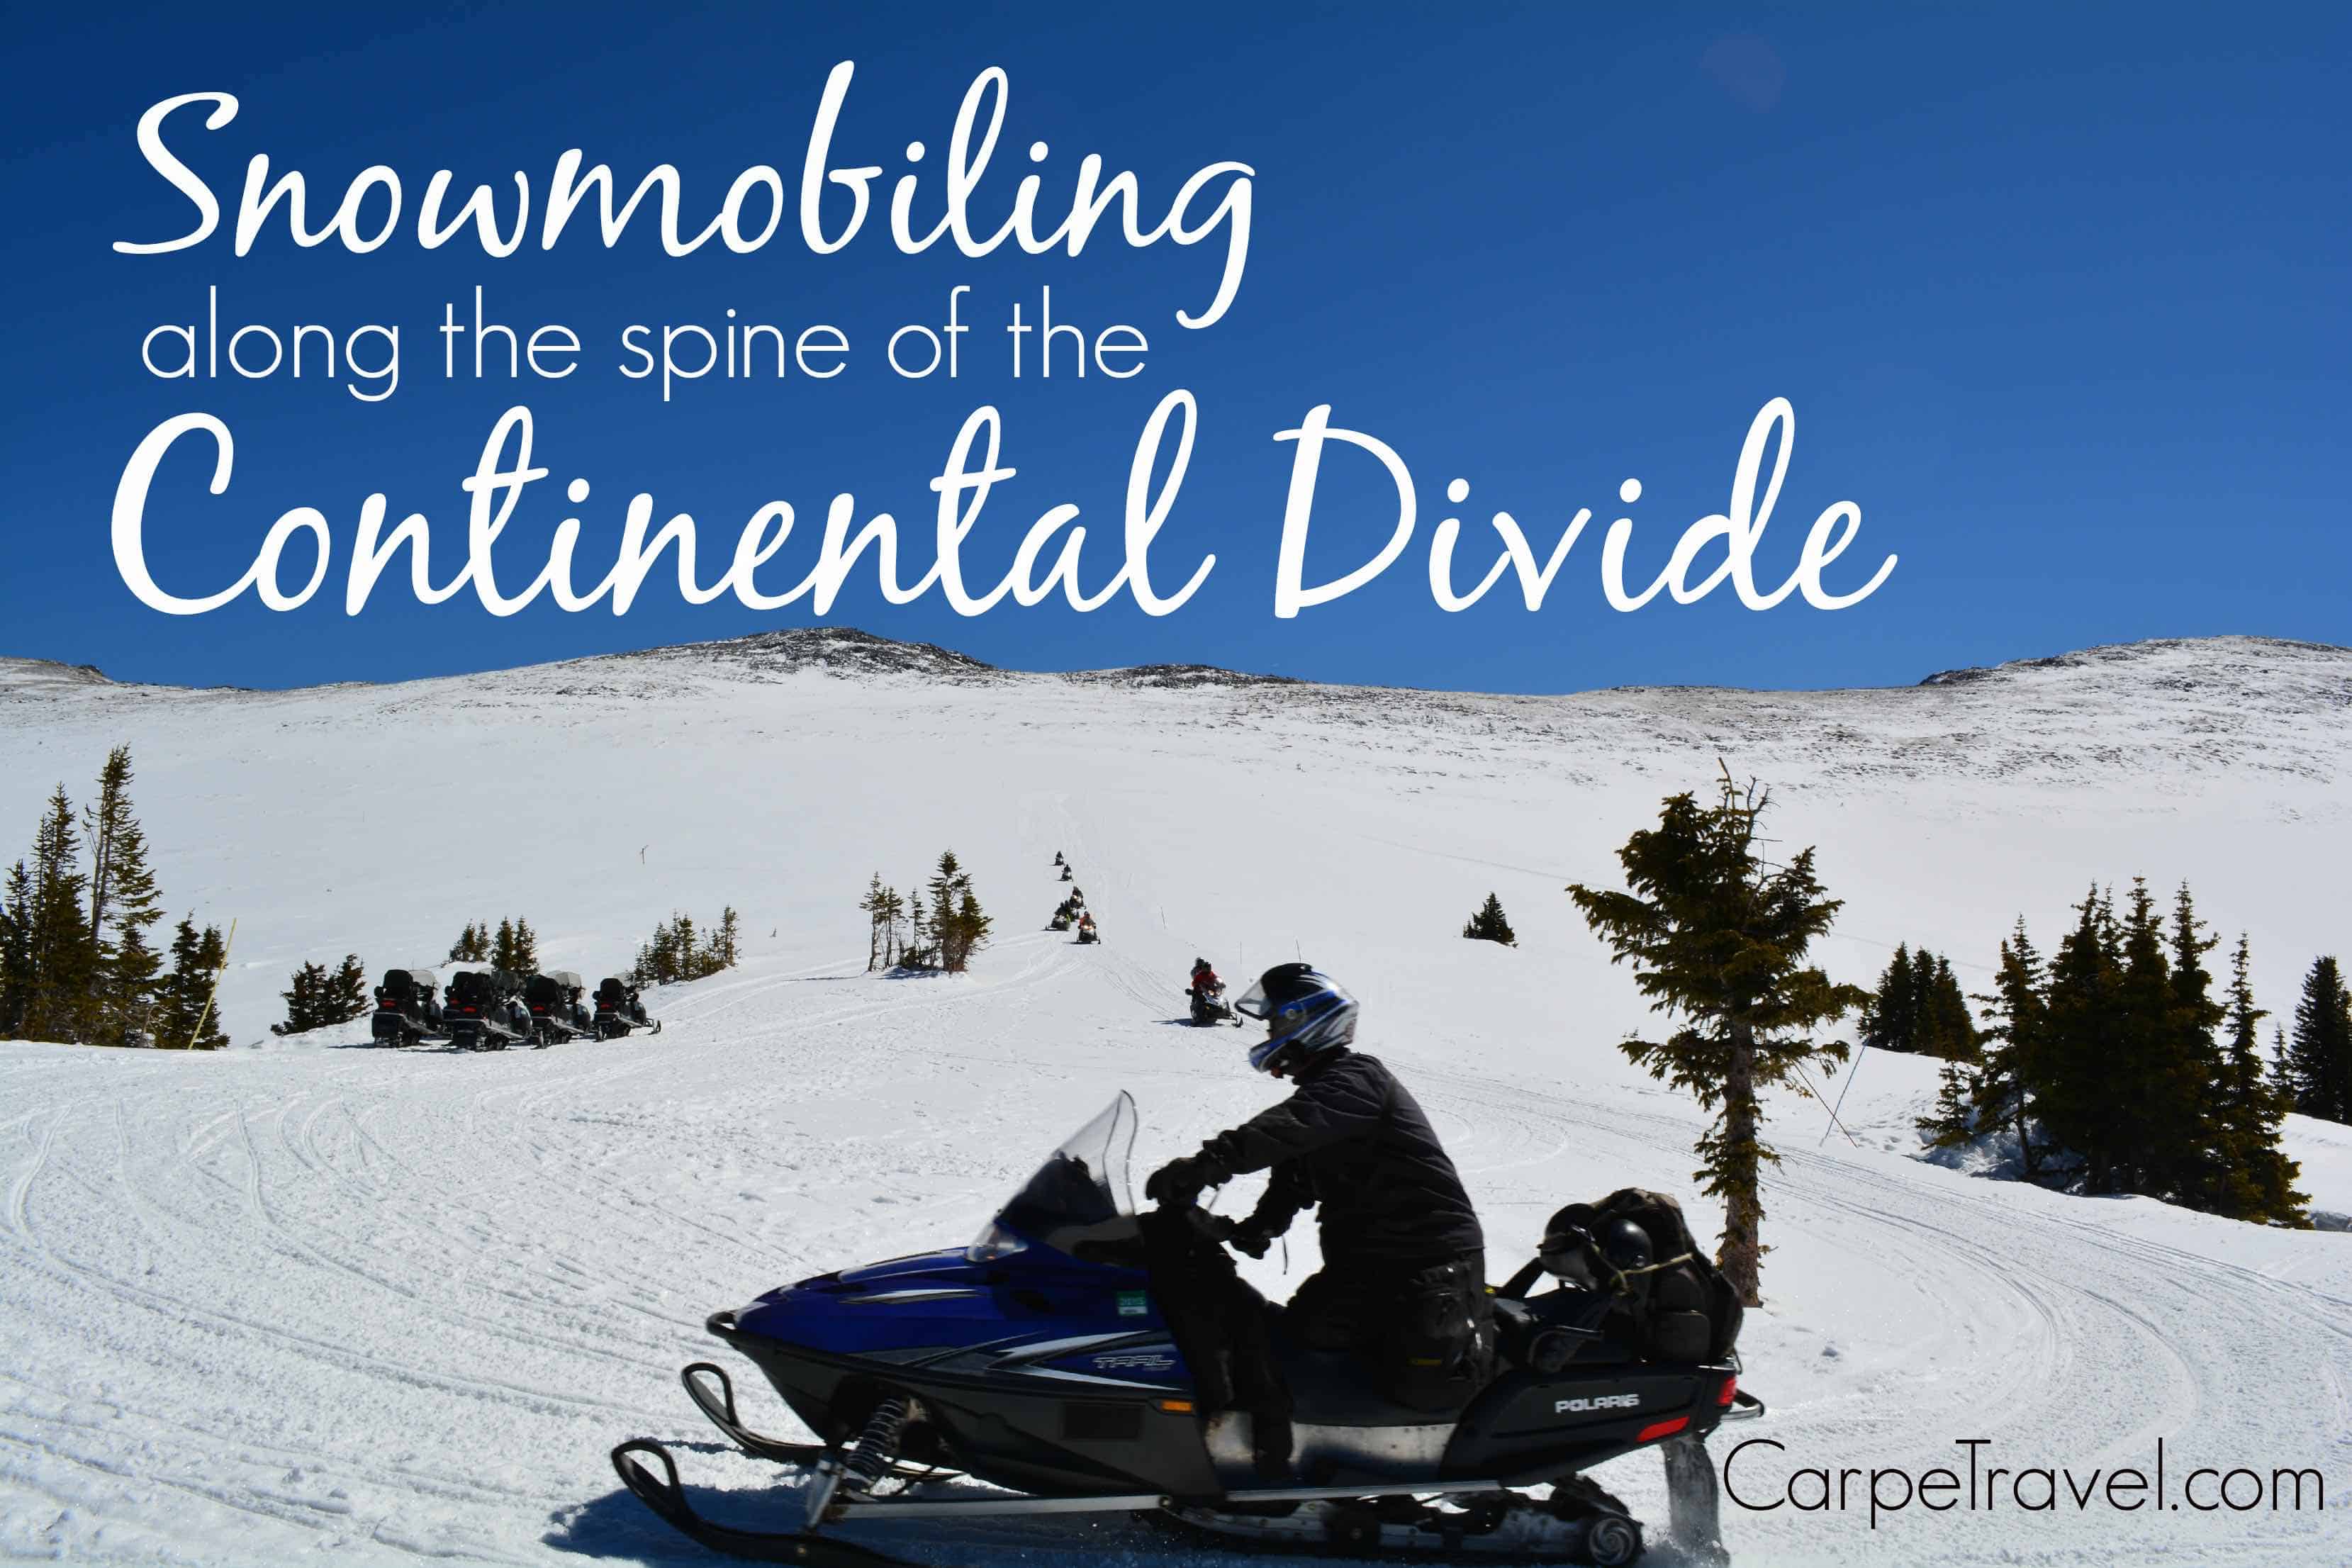 Grand Adventures Snowmobiling Tours: snowmobiling along the spine of continental divide